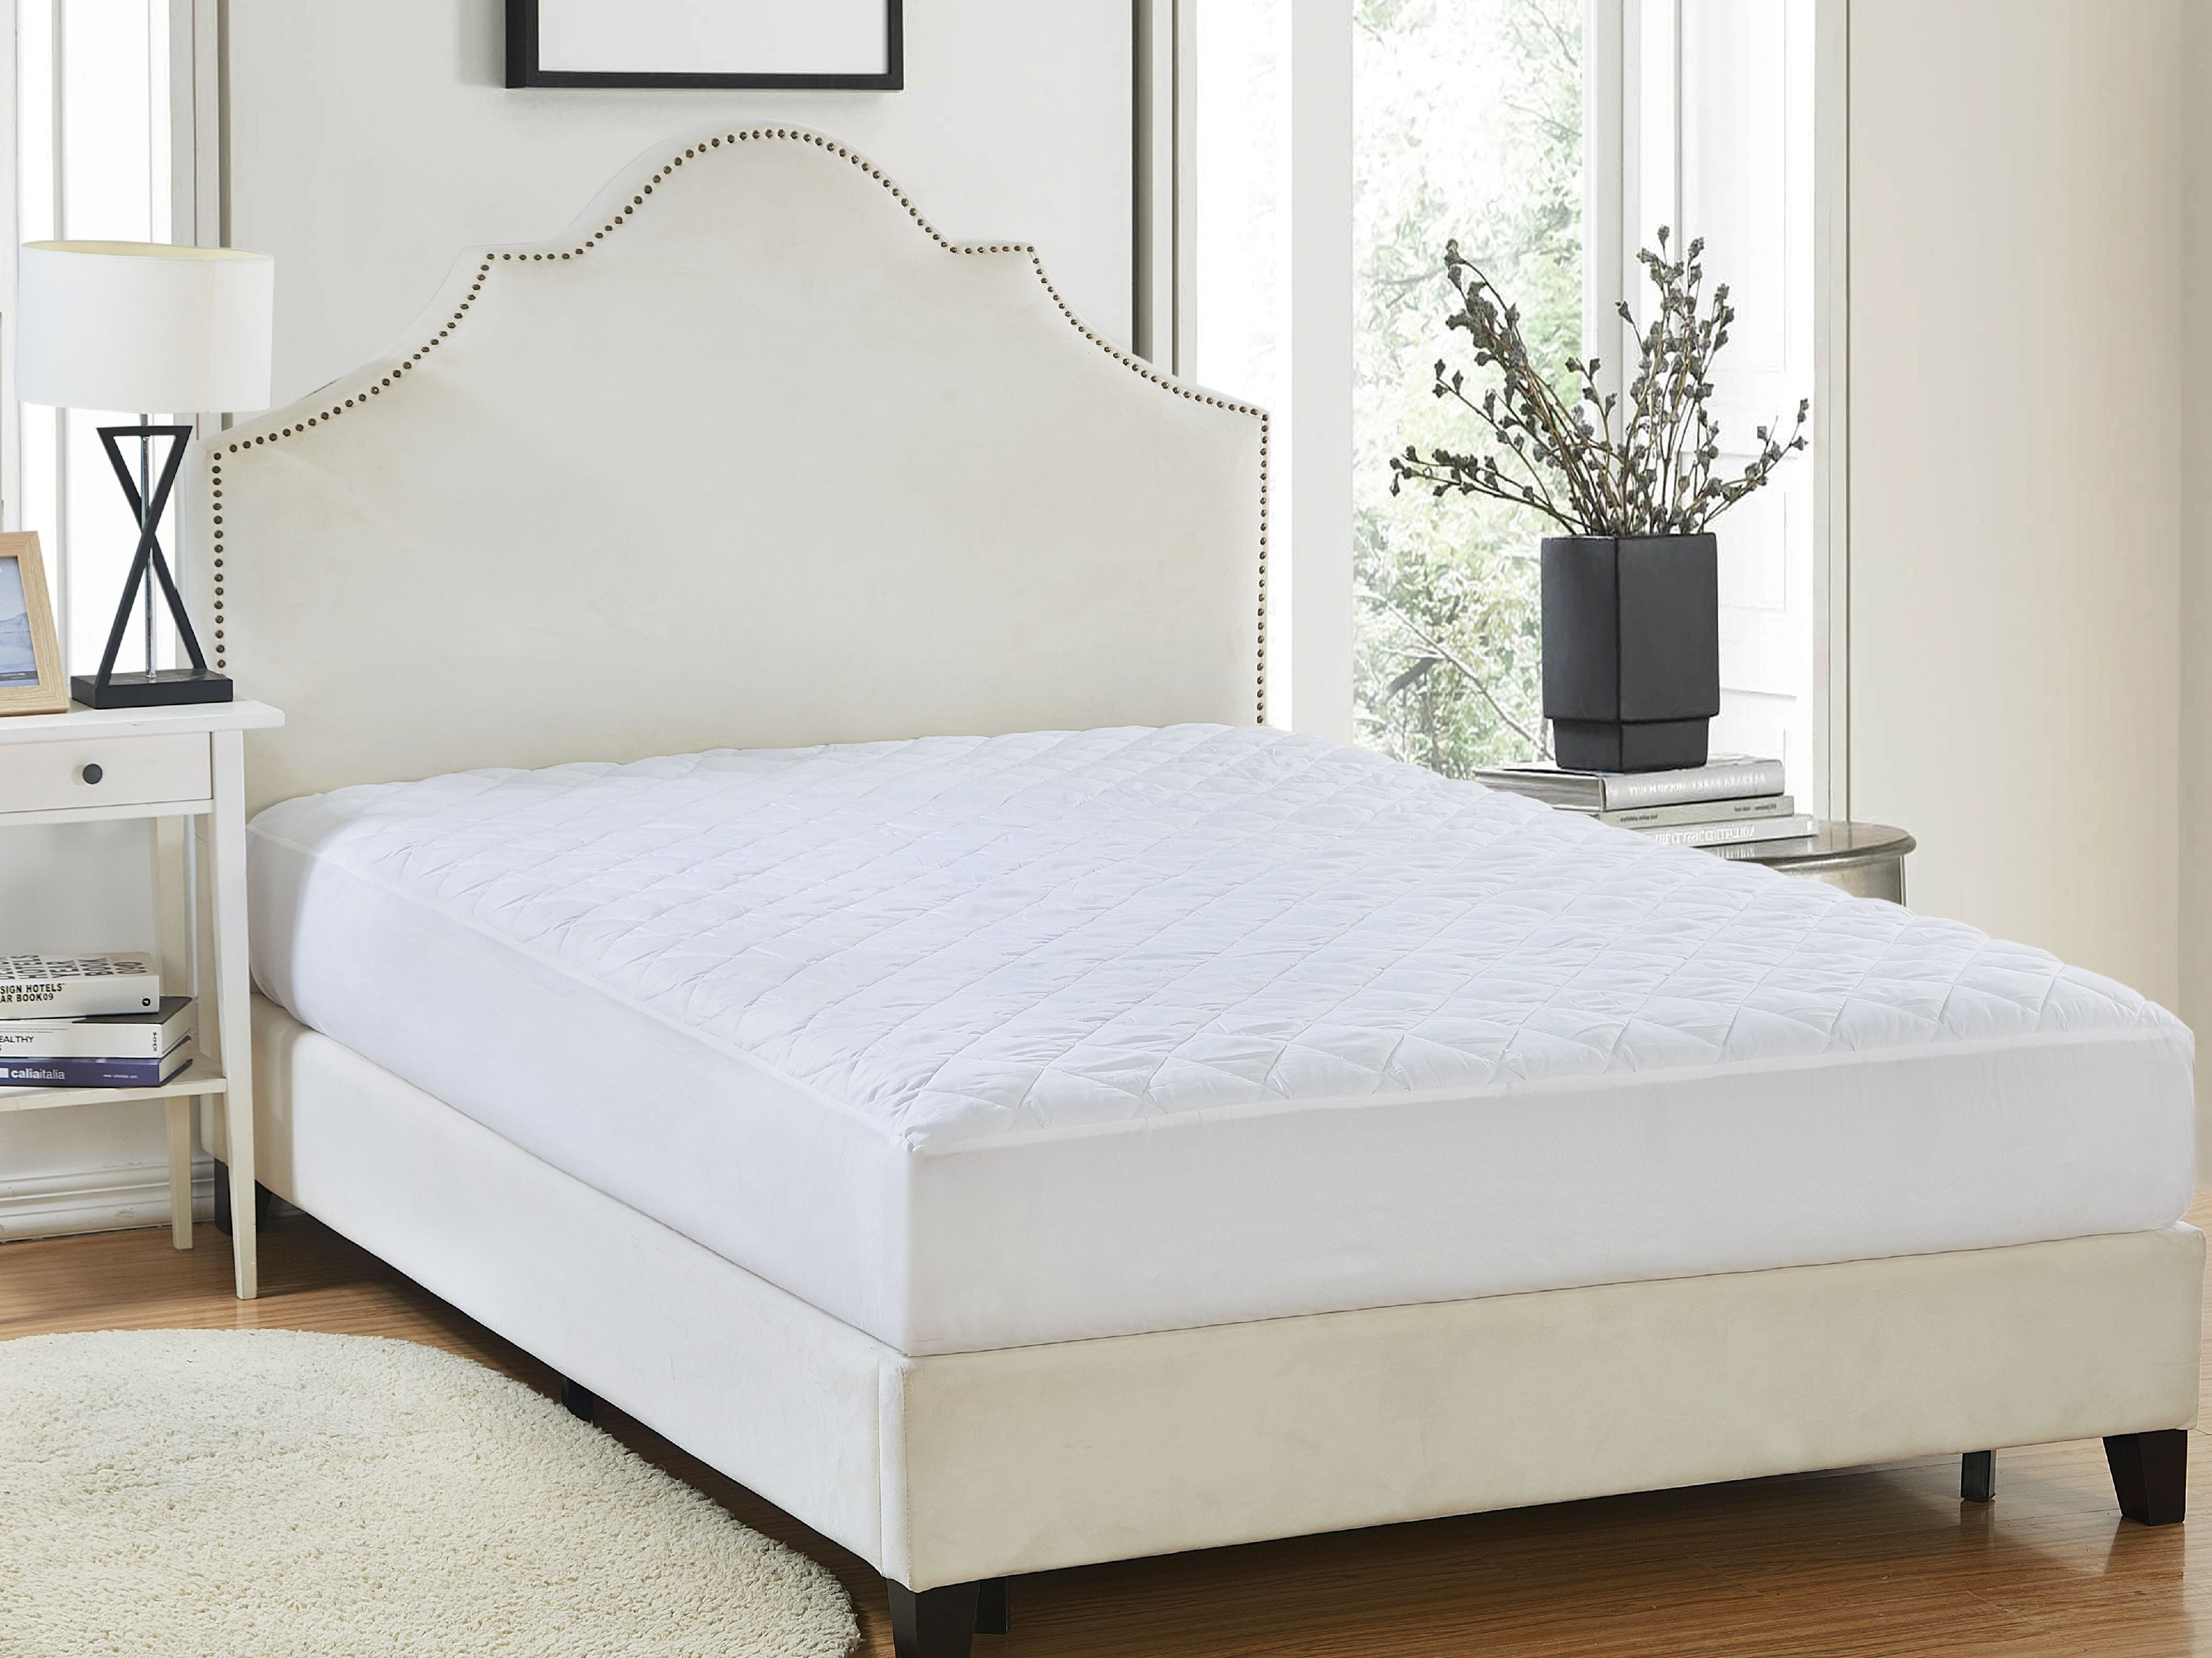 mattress covers for queen size bed